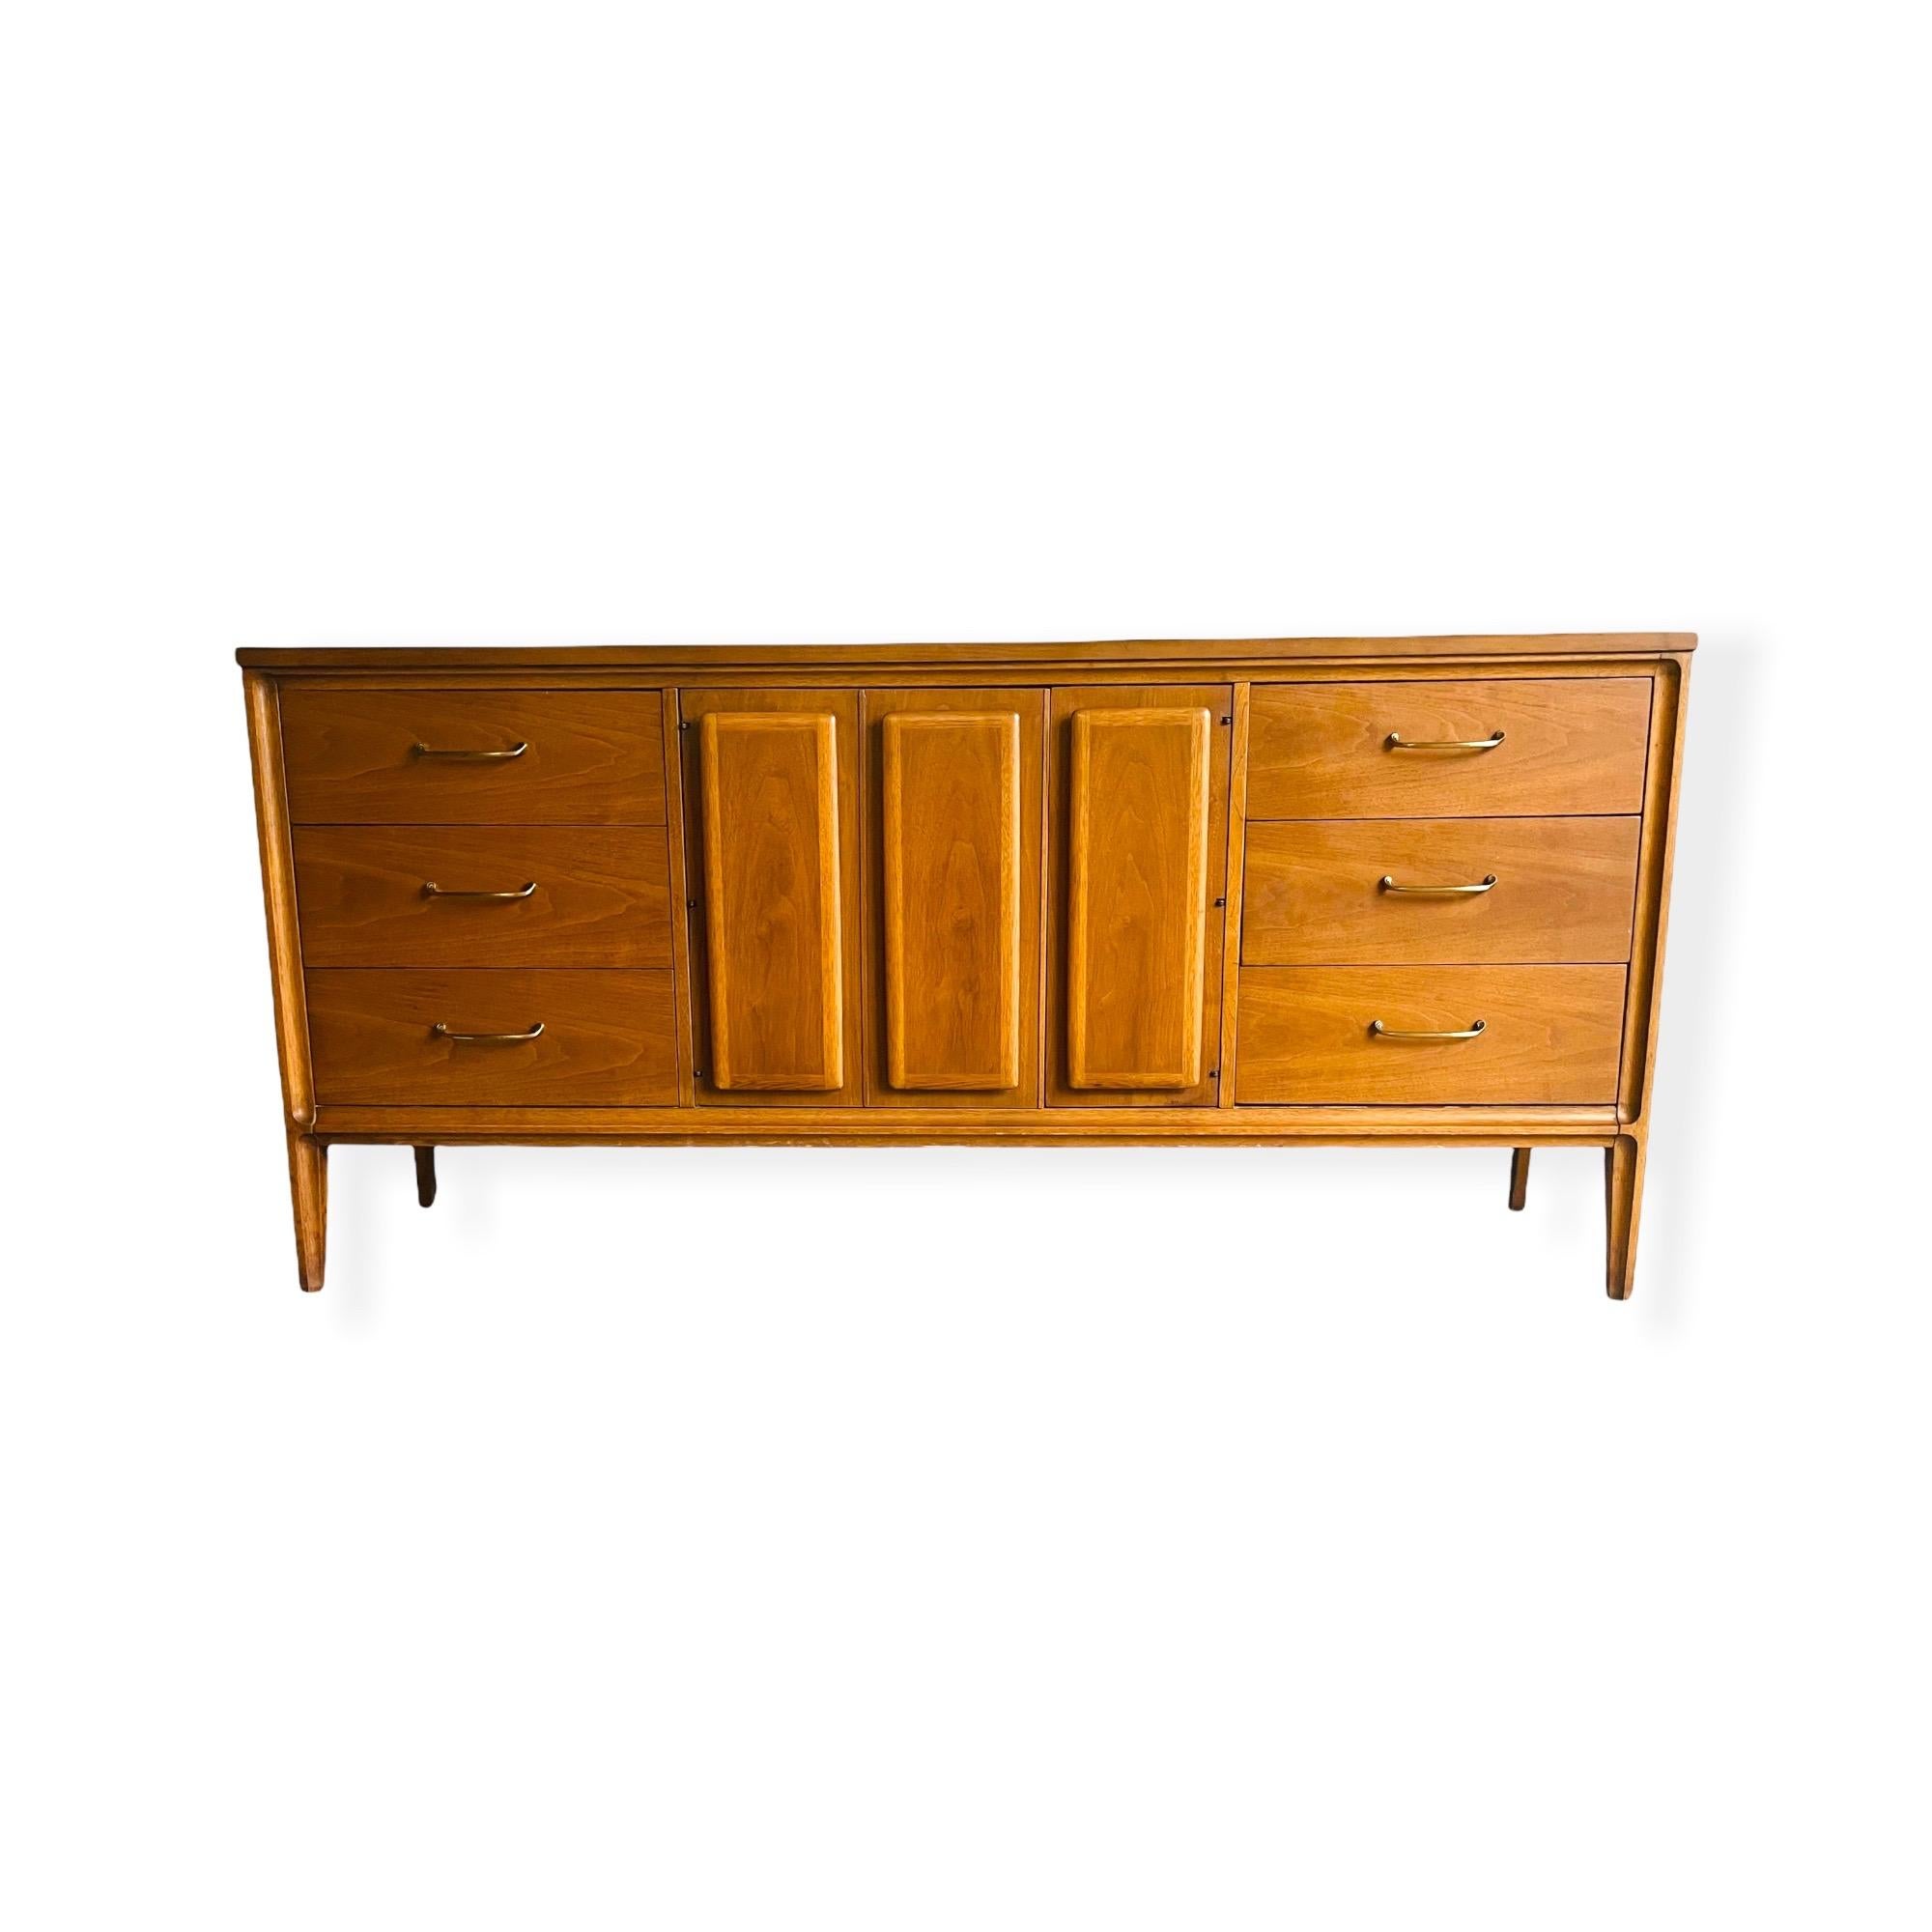 Here is a stunning Mid-Century Modern Credenza / Dresser by Broyhill Premier from their “Forward 70’s” line. This credenza is equipped with 3 drawers on each side and a double door with three drawers behind the doors, for total of 9 drawers. This